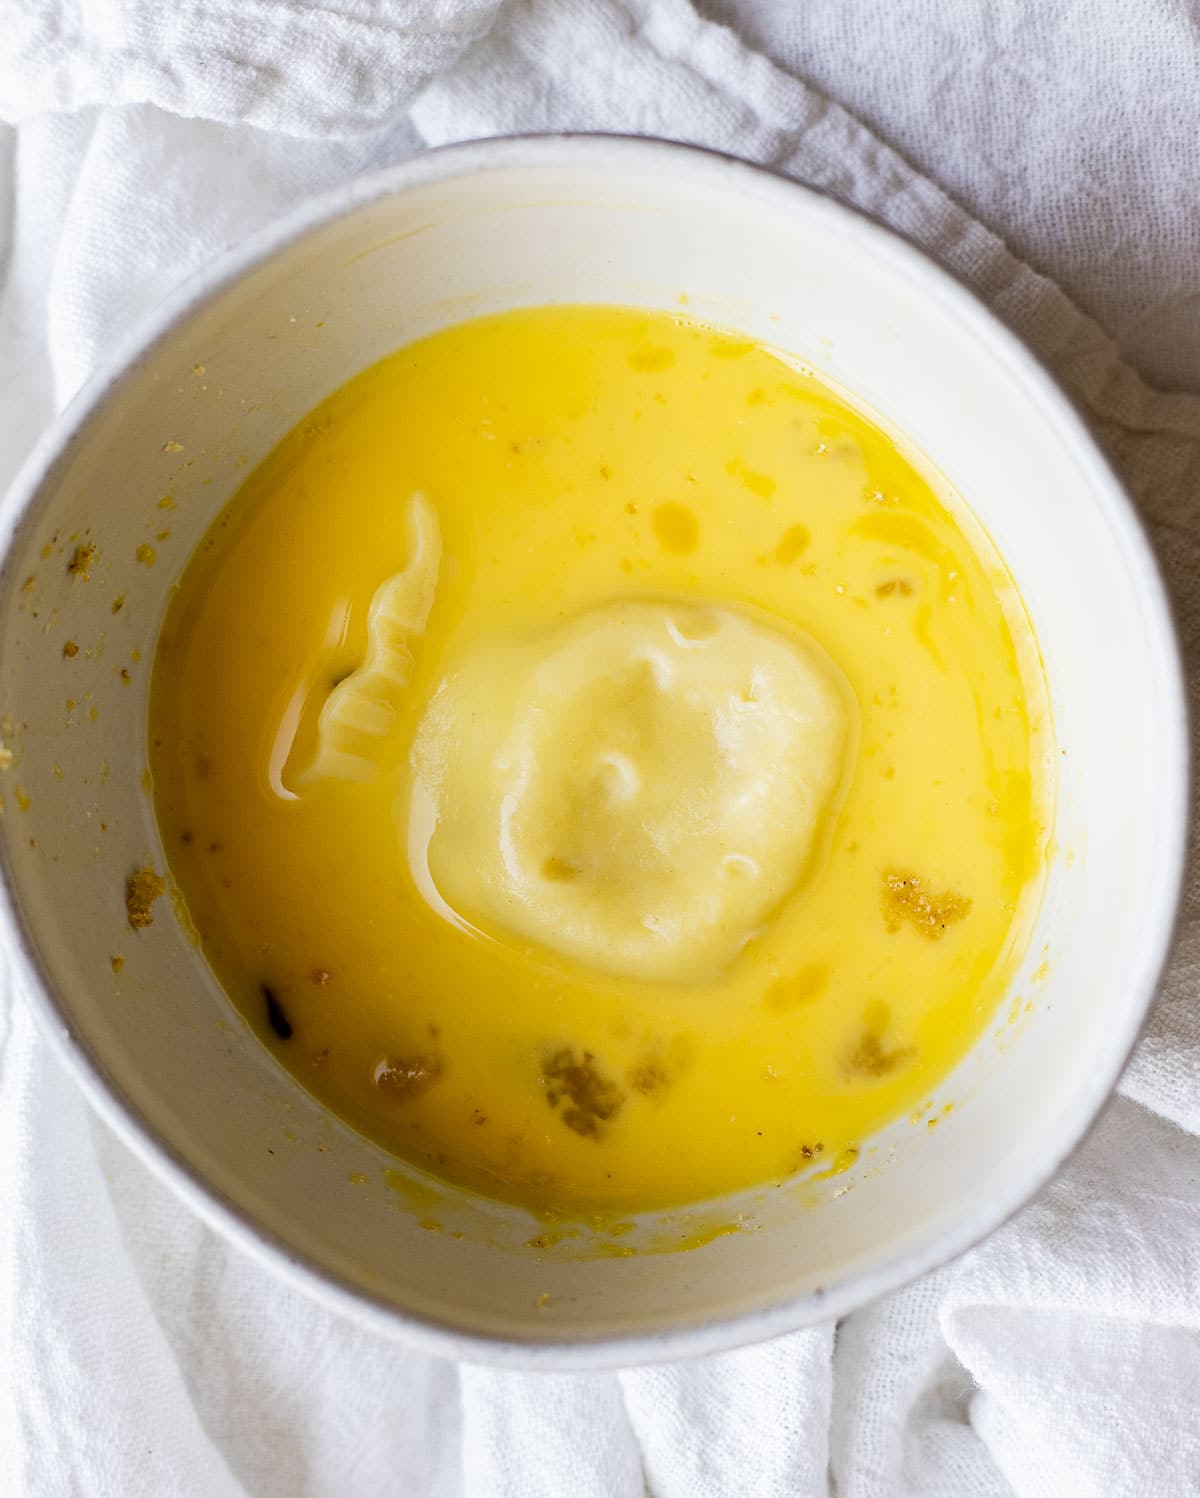 Ravioli being dipped in egg mixture in a white bowl.